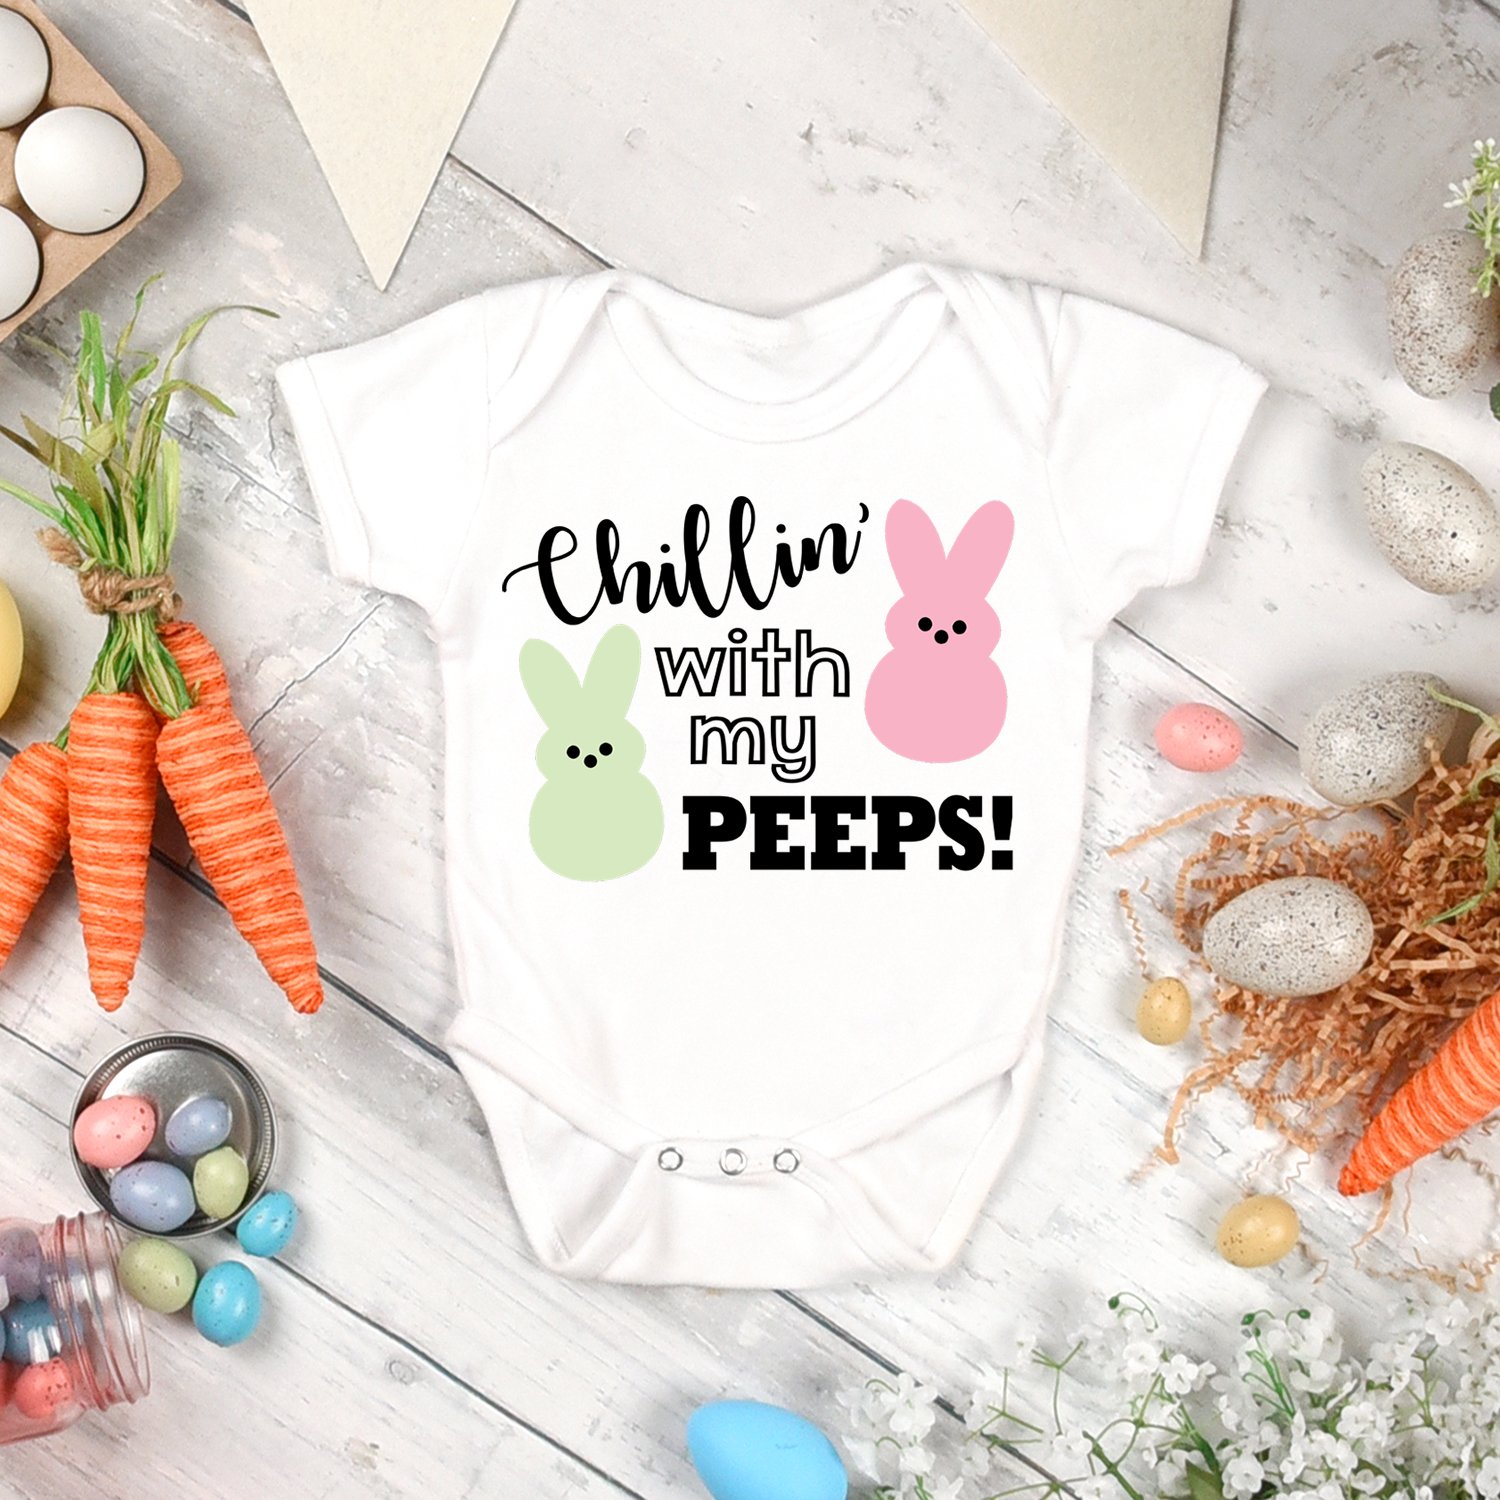 White baby onesie with "Chillin' with My Peeps" design - Easter SVG file